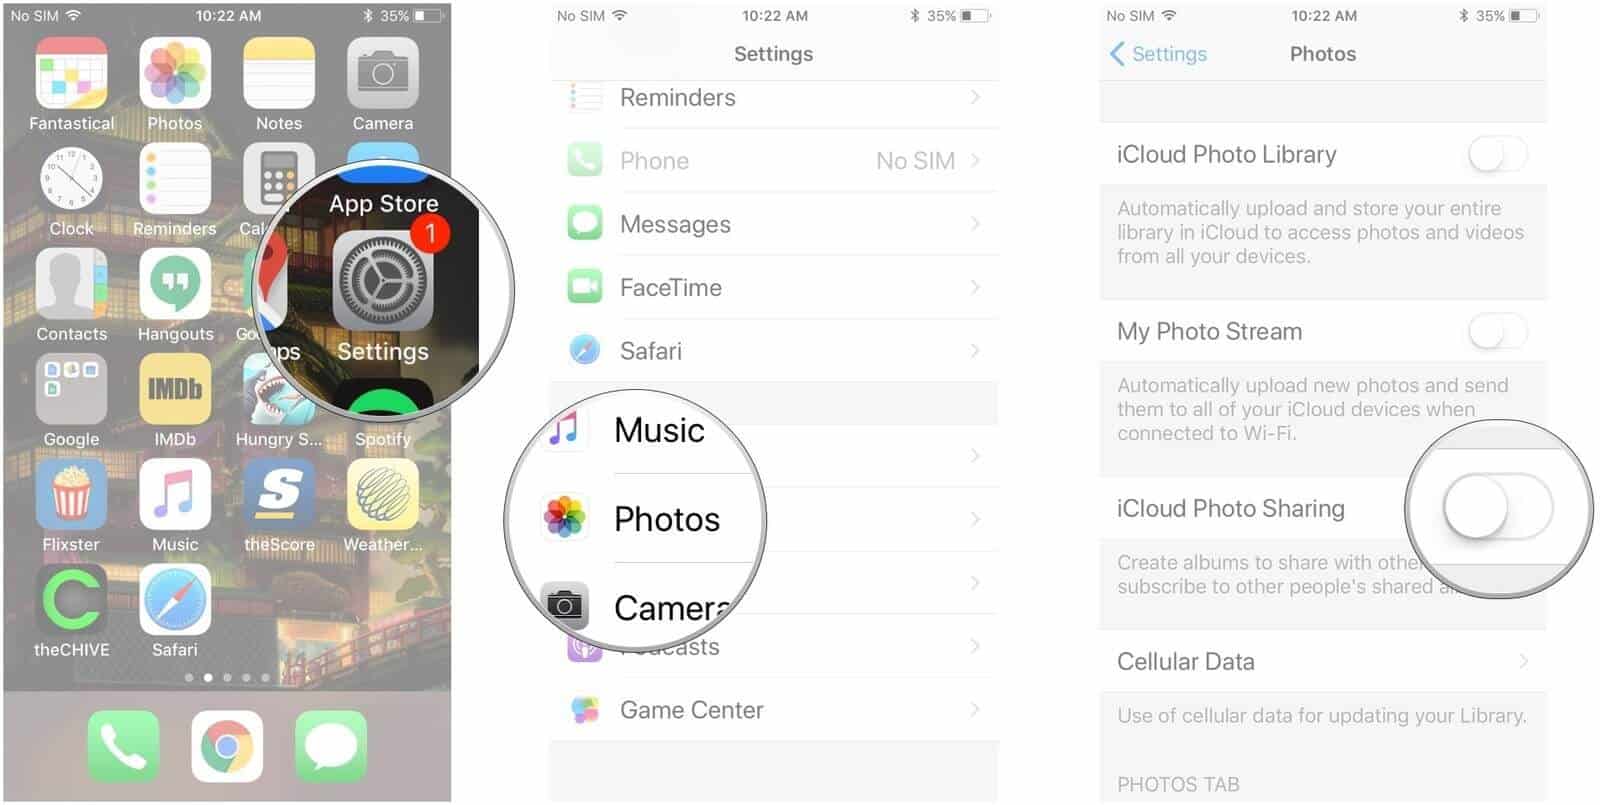 Choose photos then preferences then uncheck cloud photo sharing